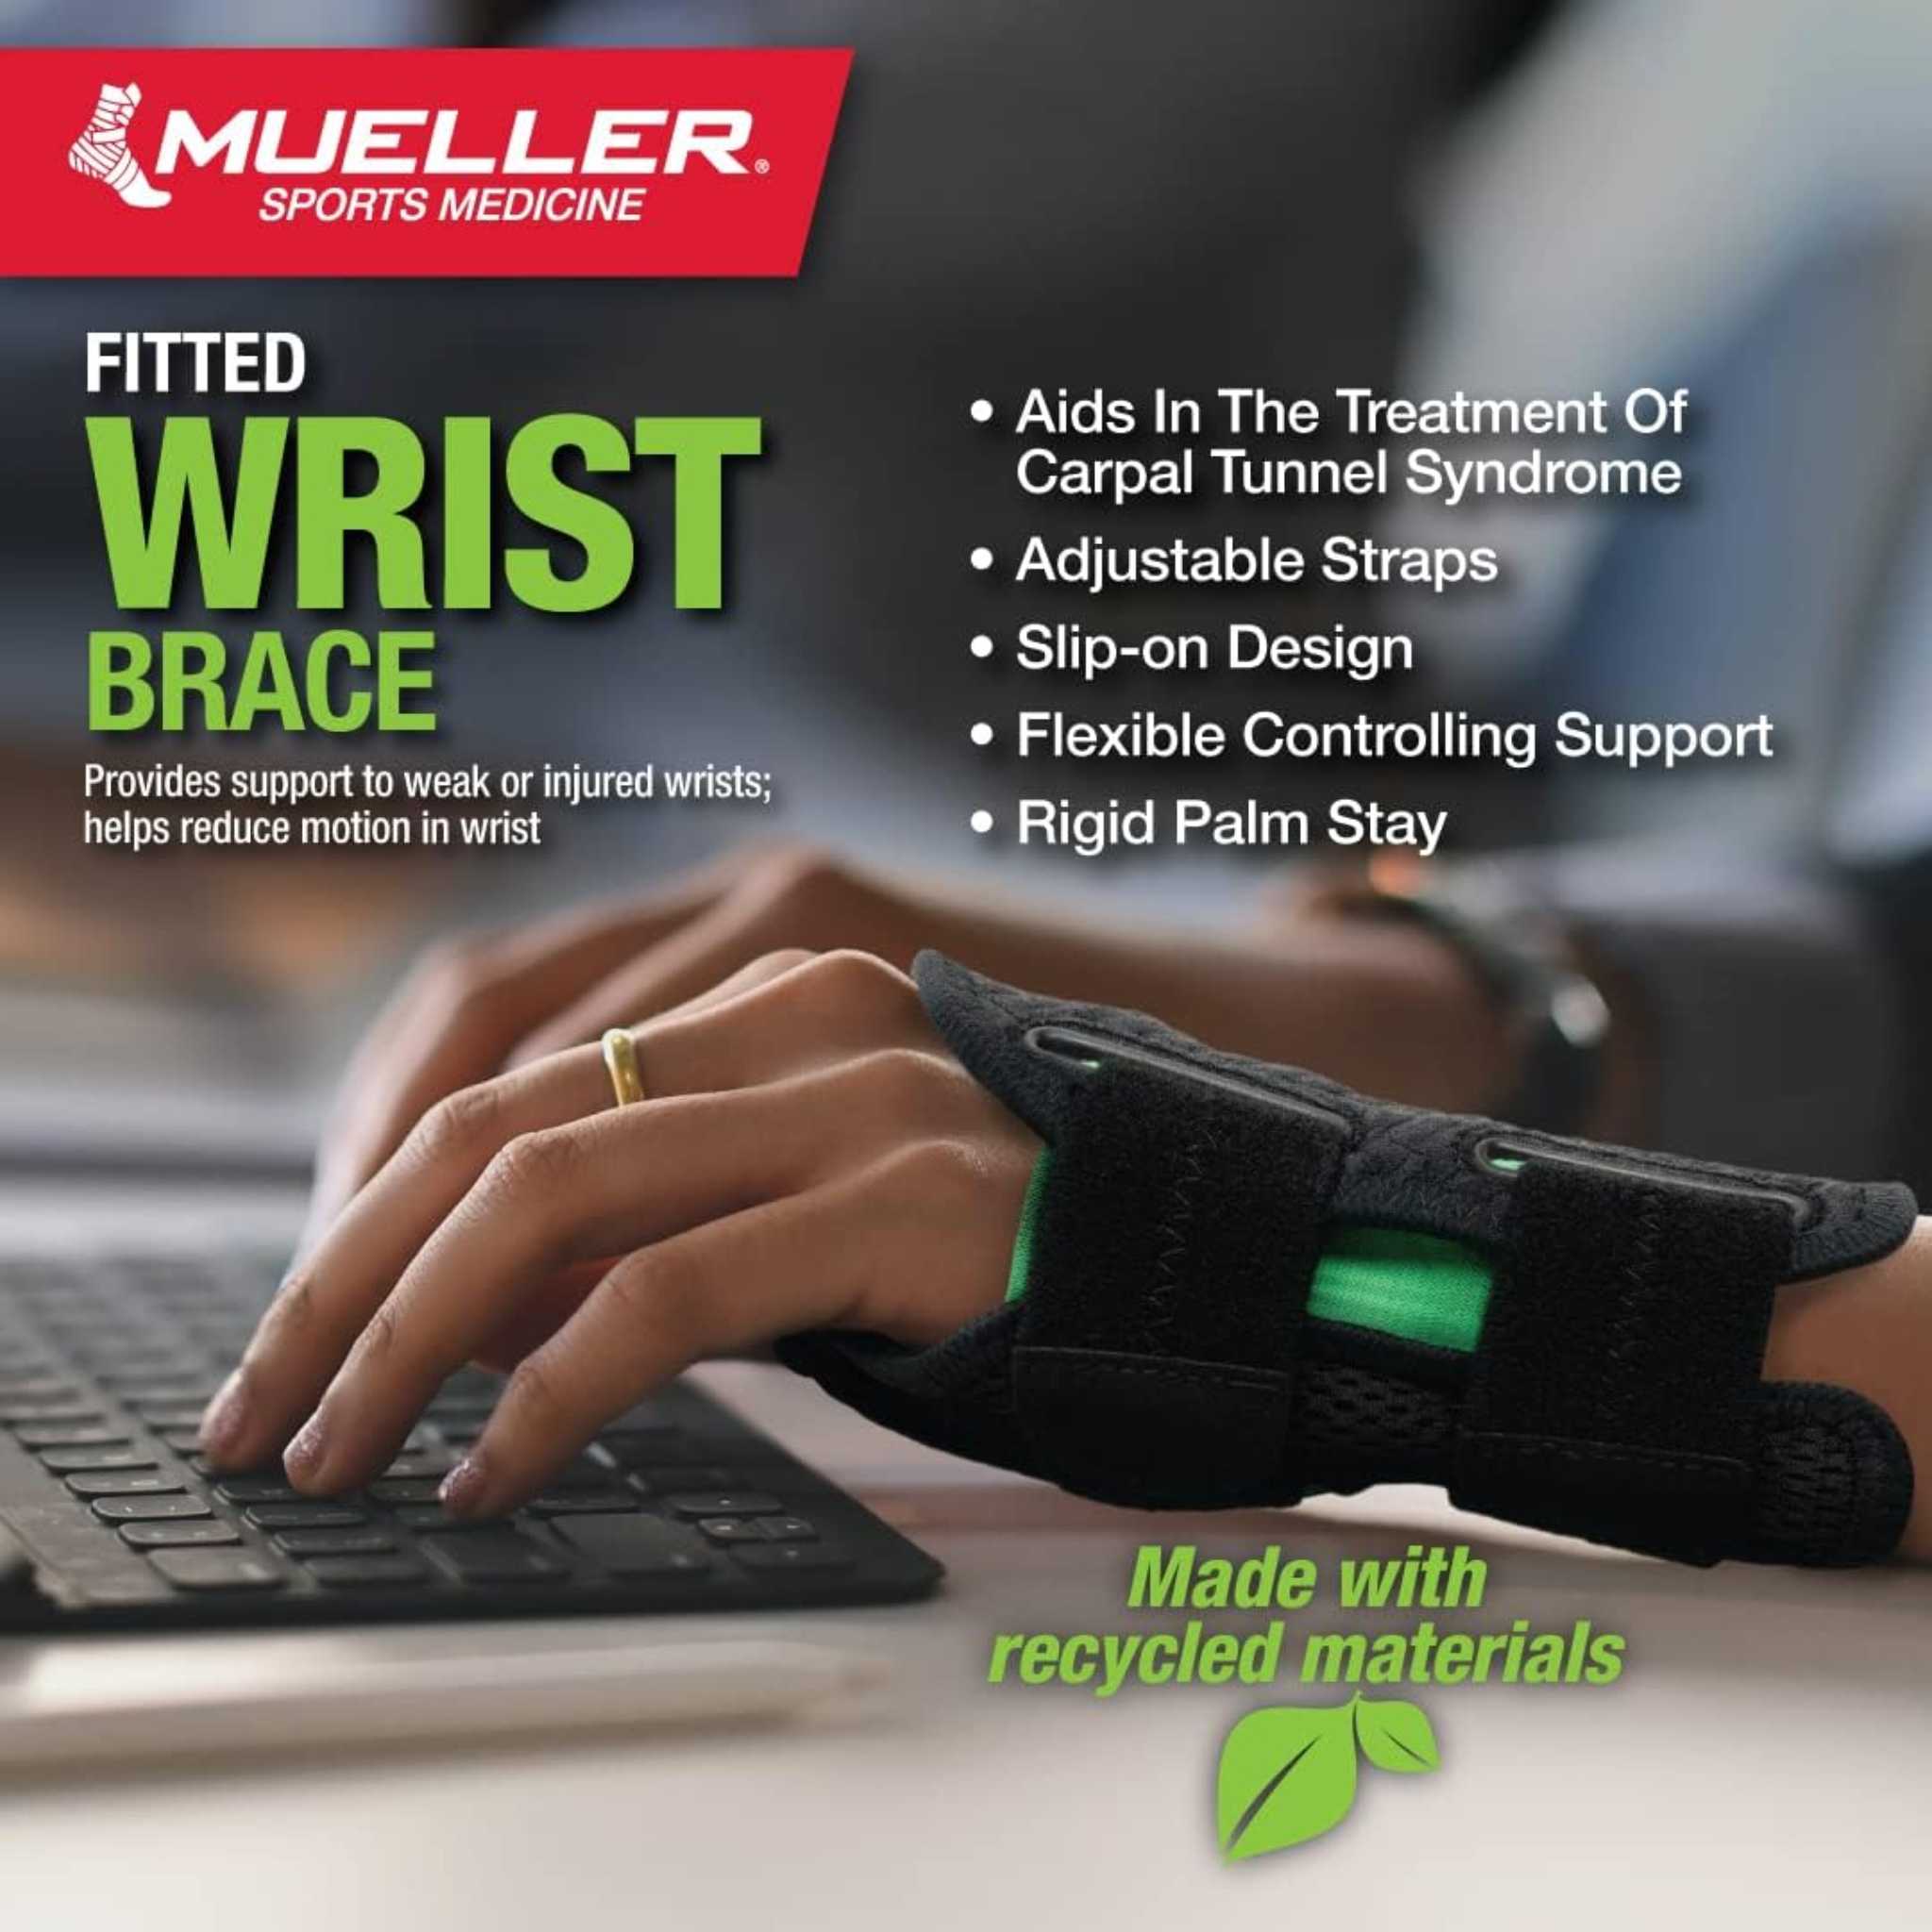 Mueller® Green Fitted Wrist Brace, Right Hand, Unisex, One Size Fits Most - Black